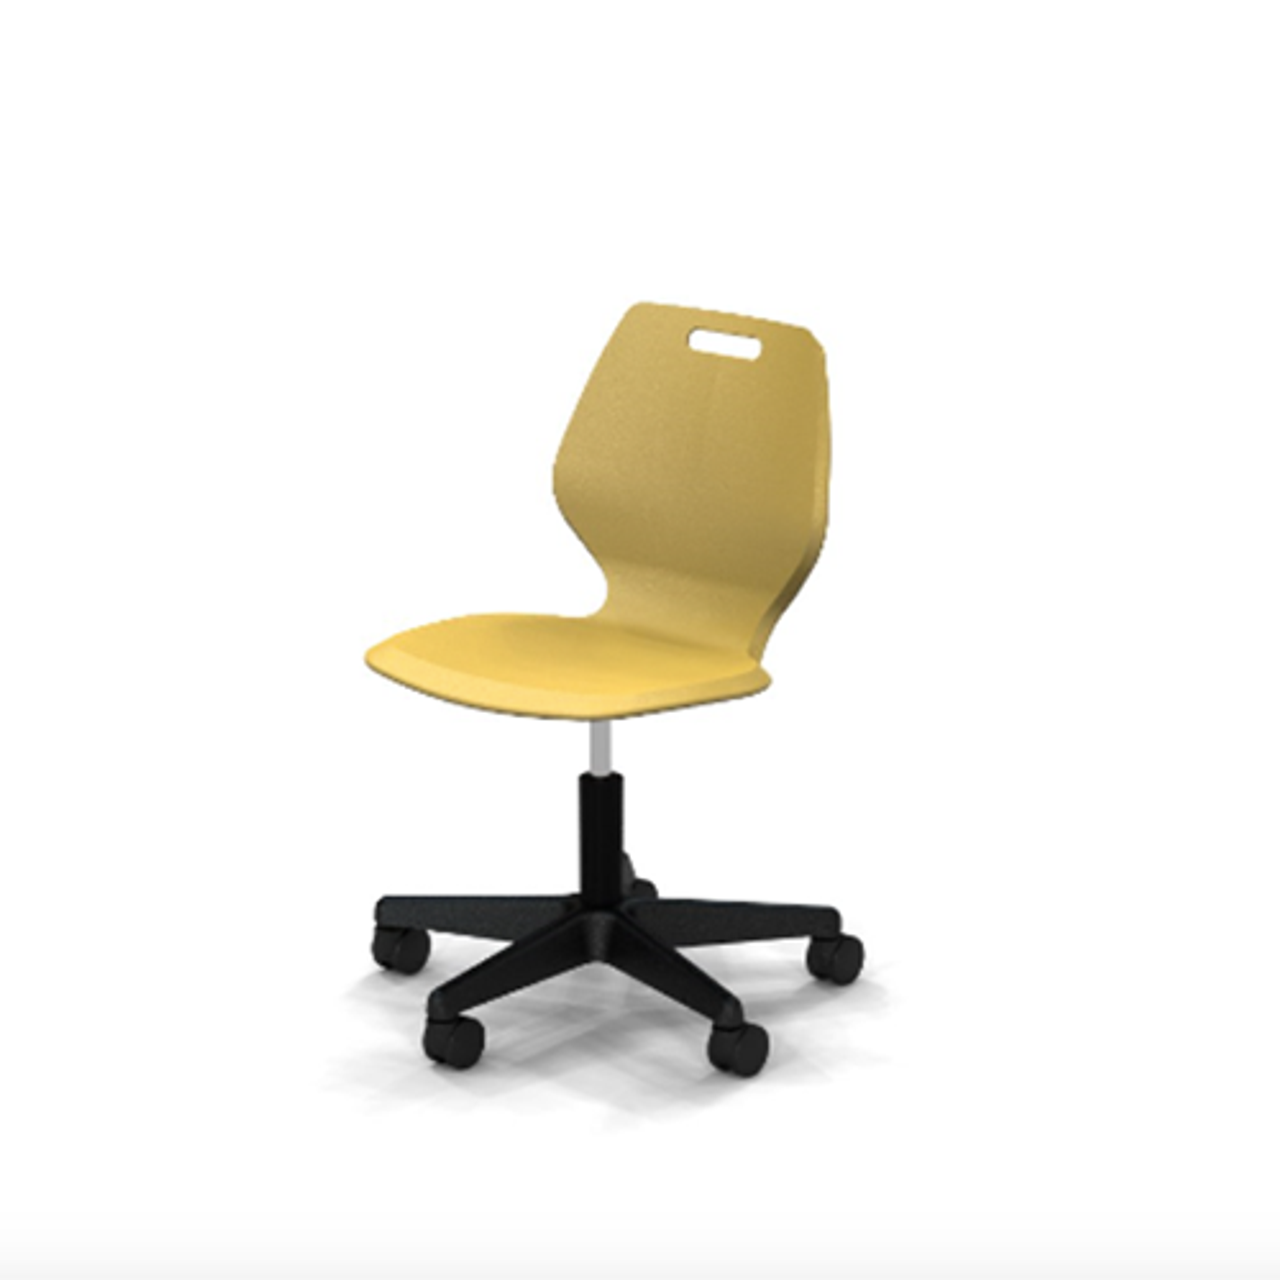 Conversion Kit for Office Chair to Stool Height